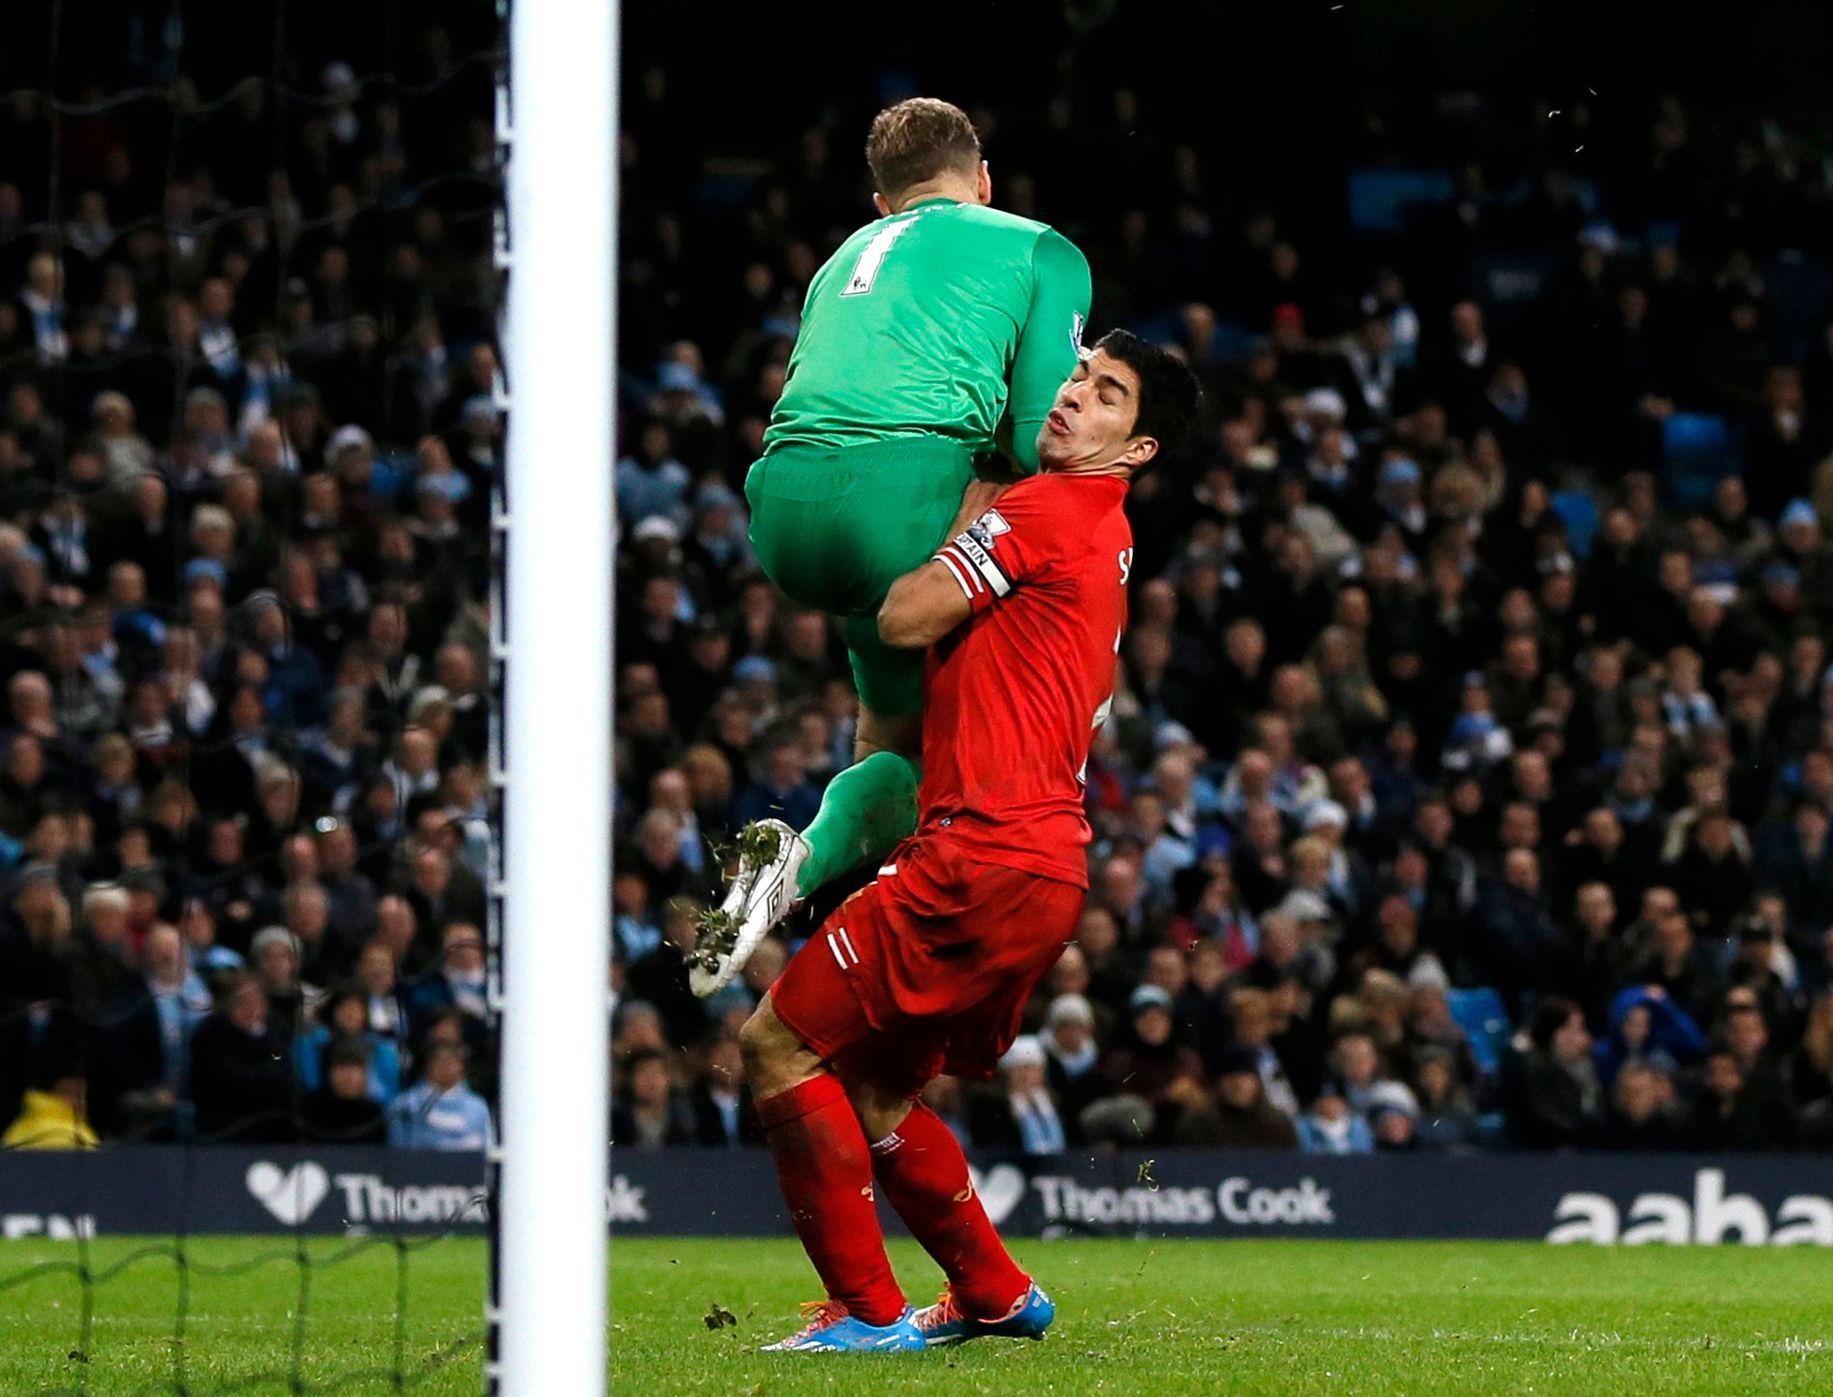 Liverpool's Suarez collides with Manchester City's Hart during their English Premier League soccer match in Manchester